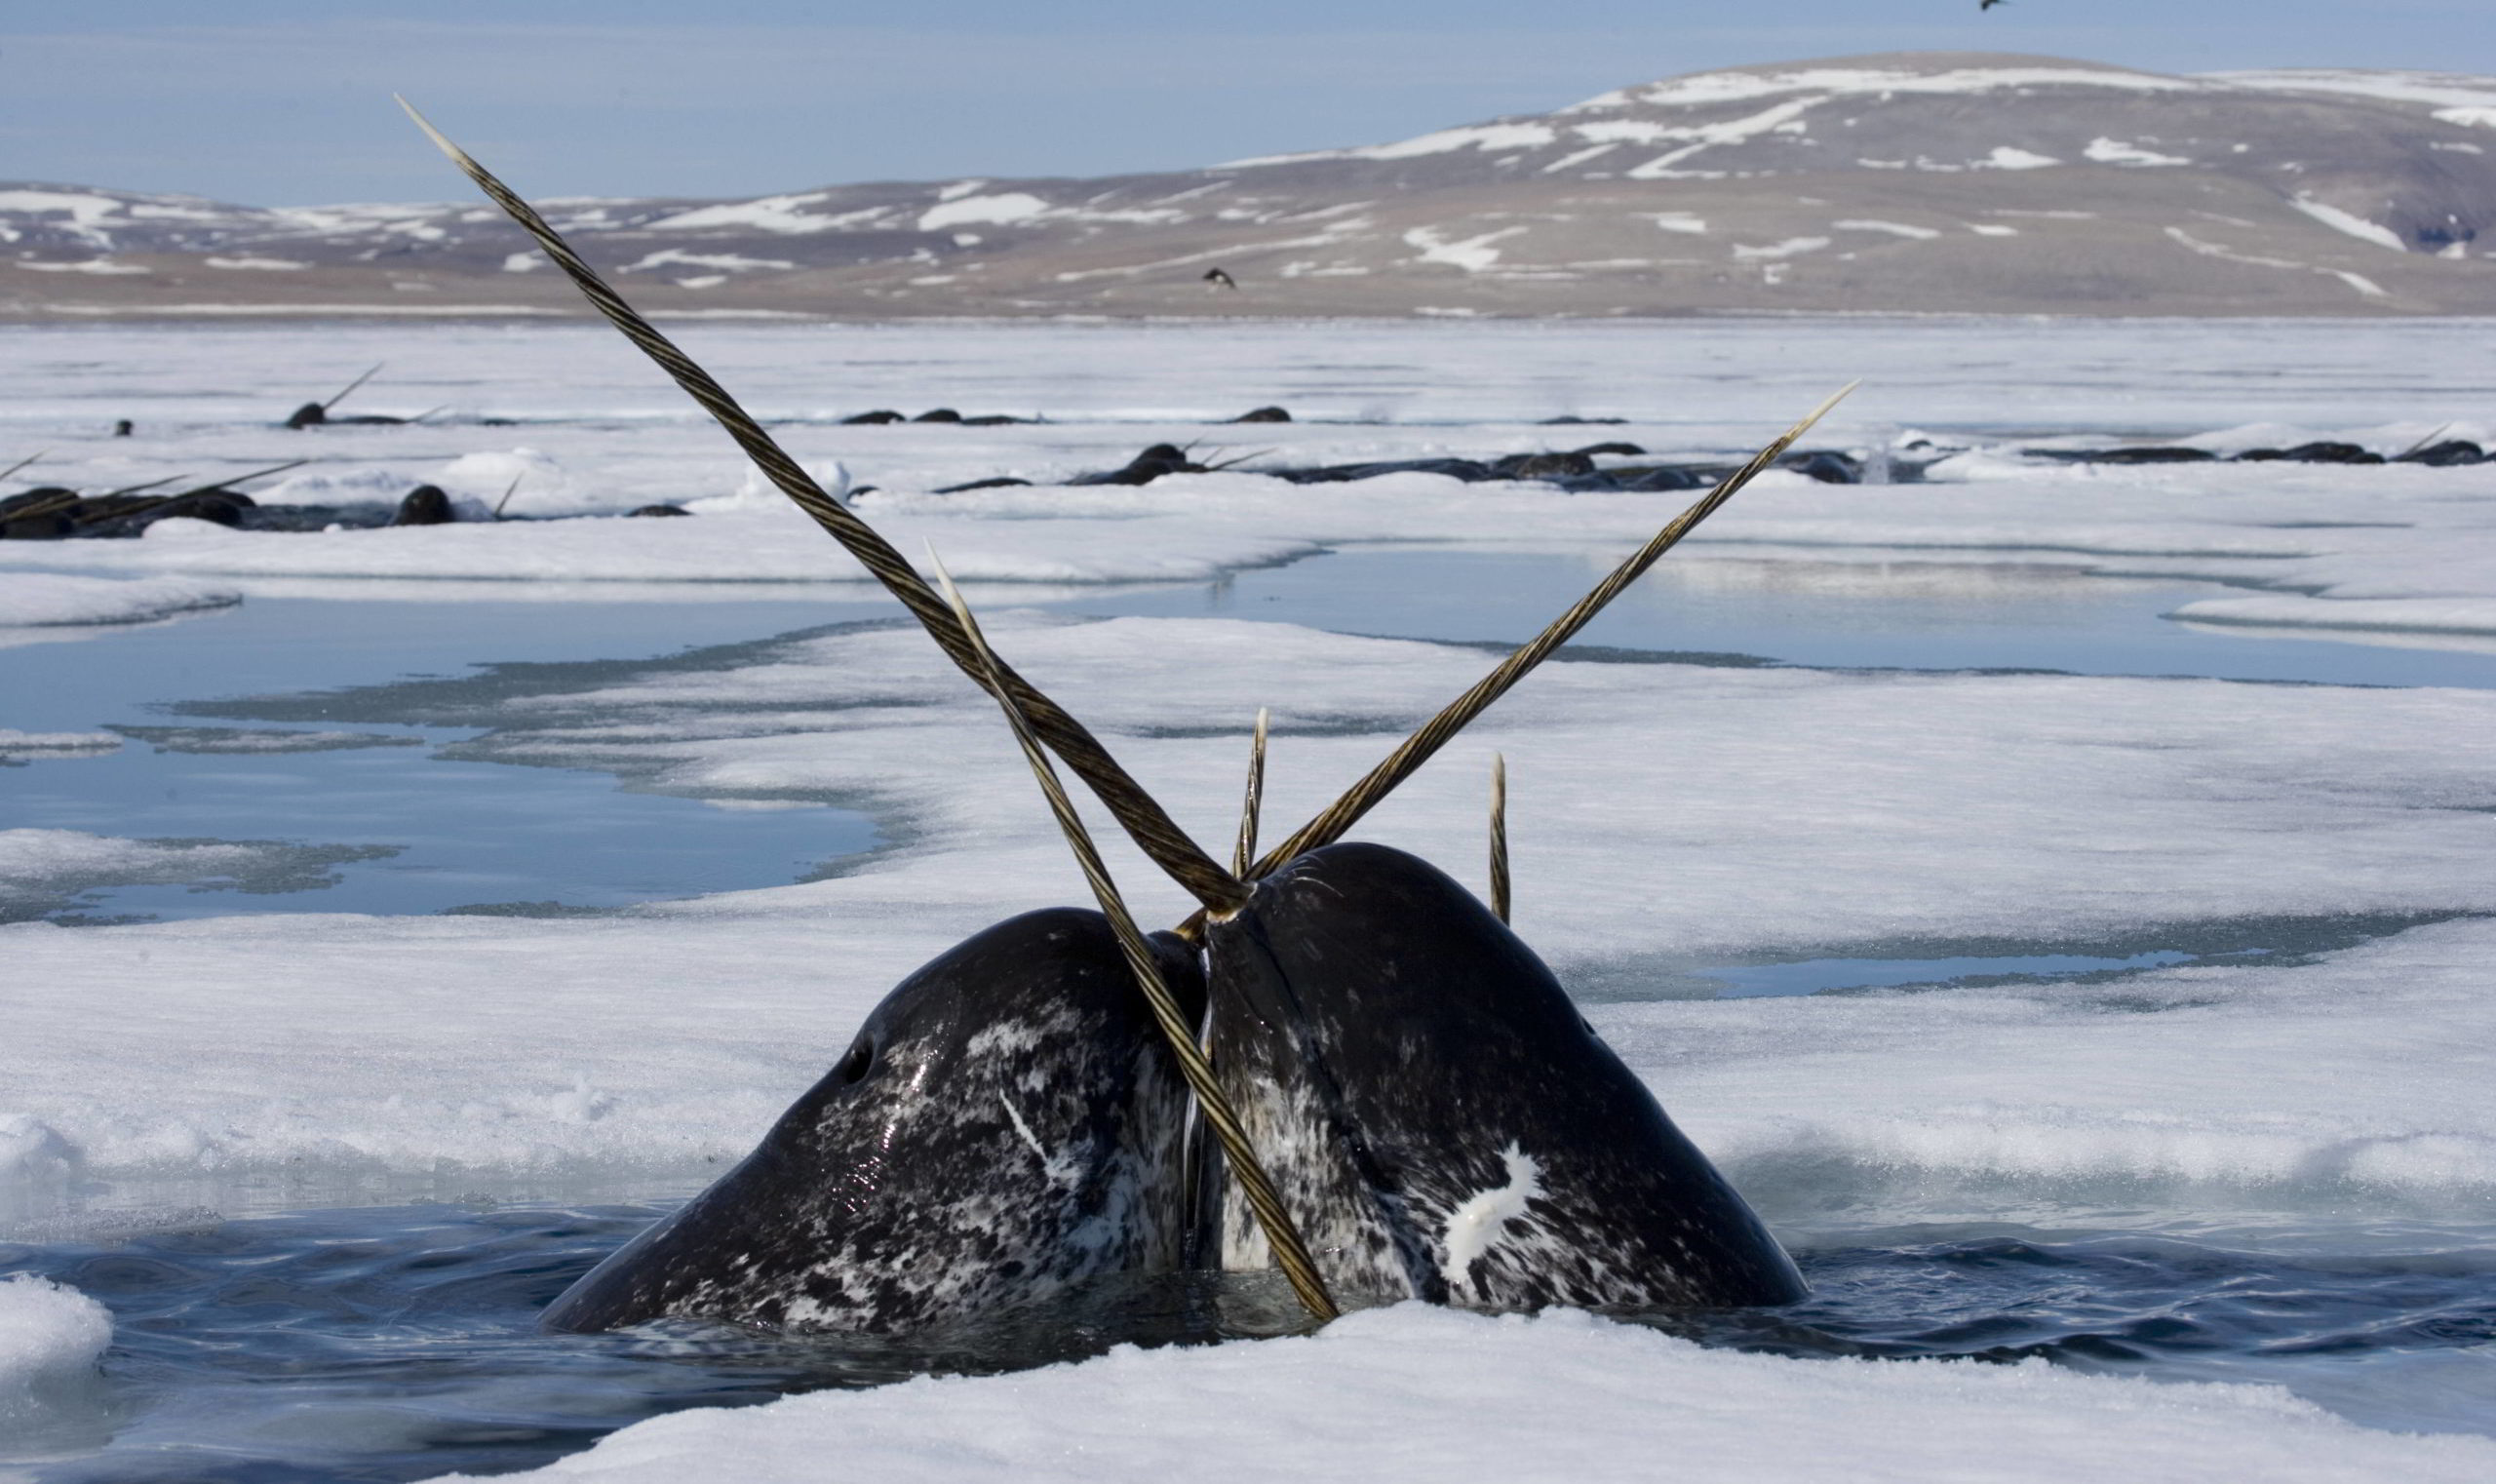 Two narwhal surfacing to breathe in Lancaster Sound, Nunavut, Canada